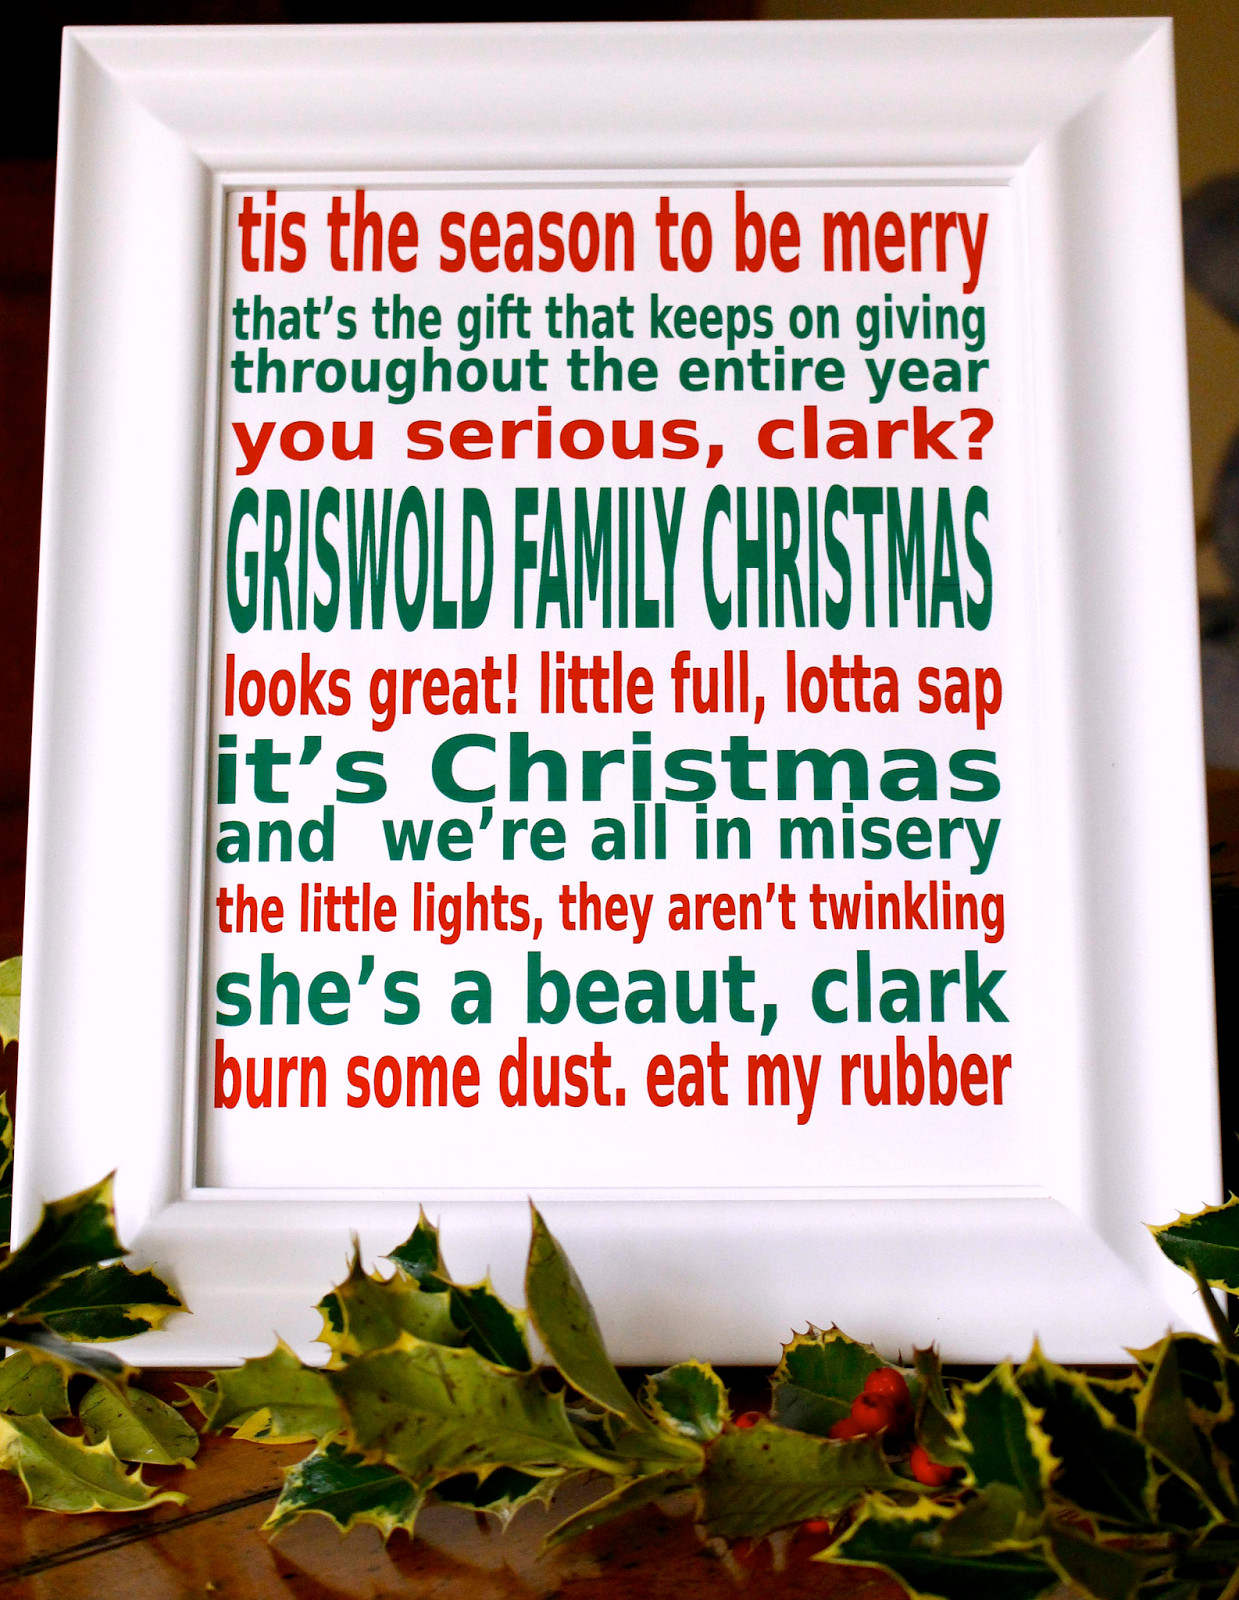 National.Lampoons Christmas Vacation Quotes
 National Lampoons Christmas Vacation printable movie quote